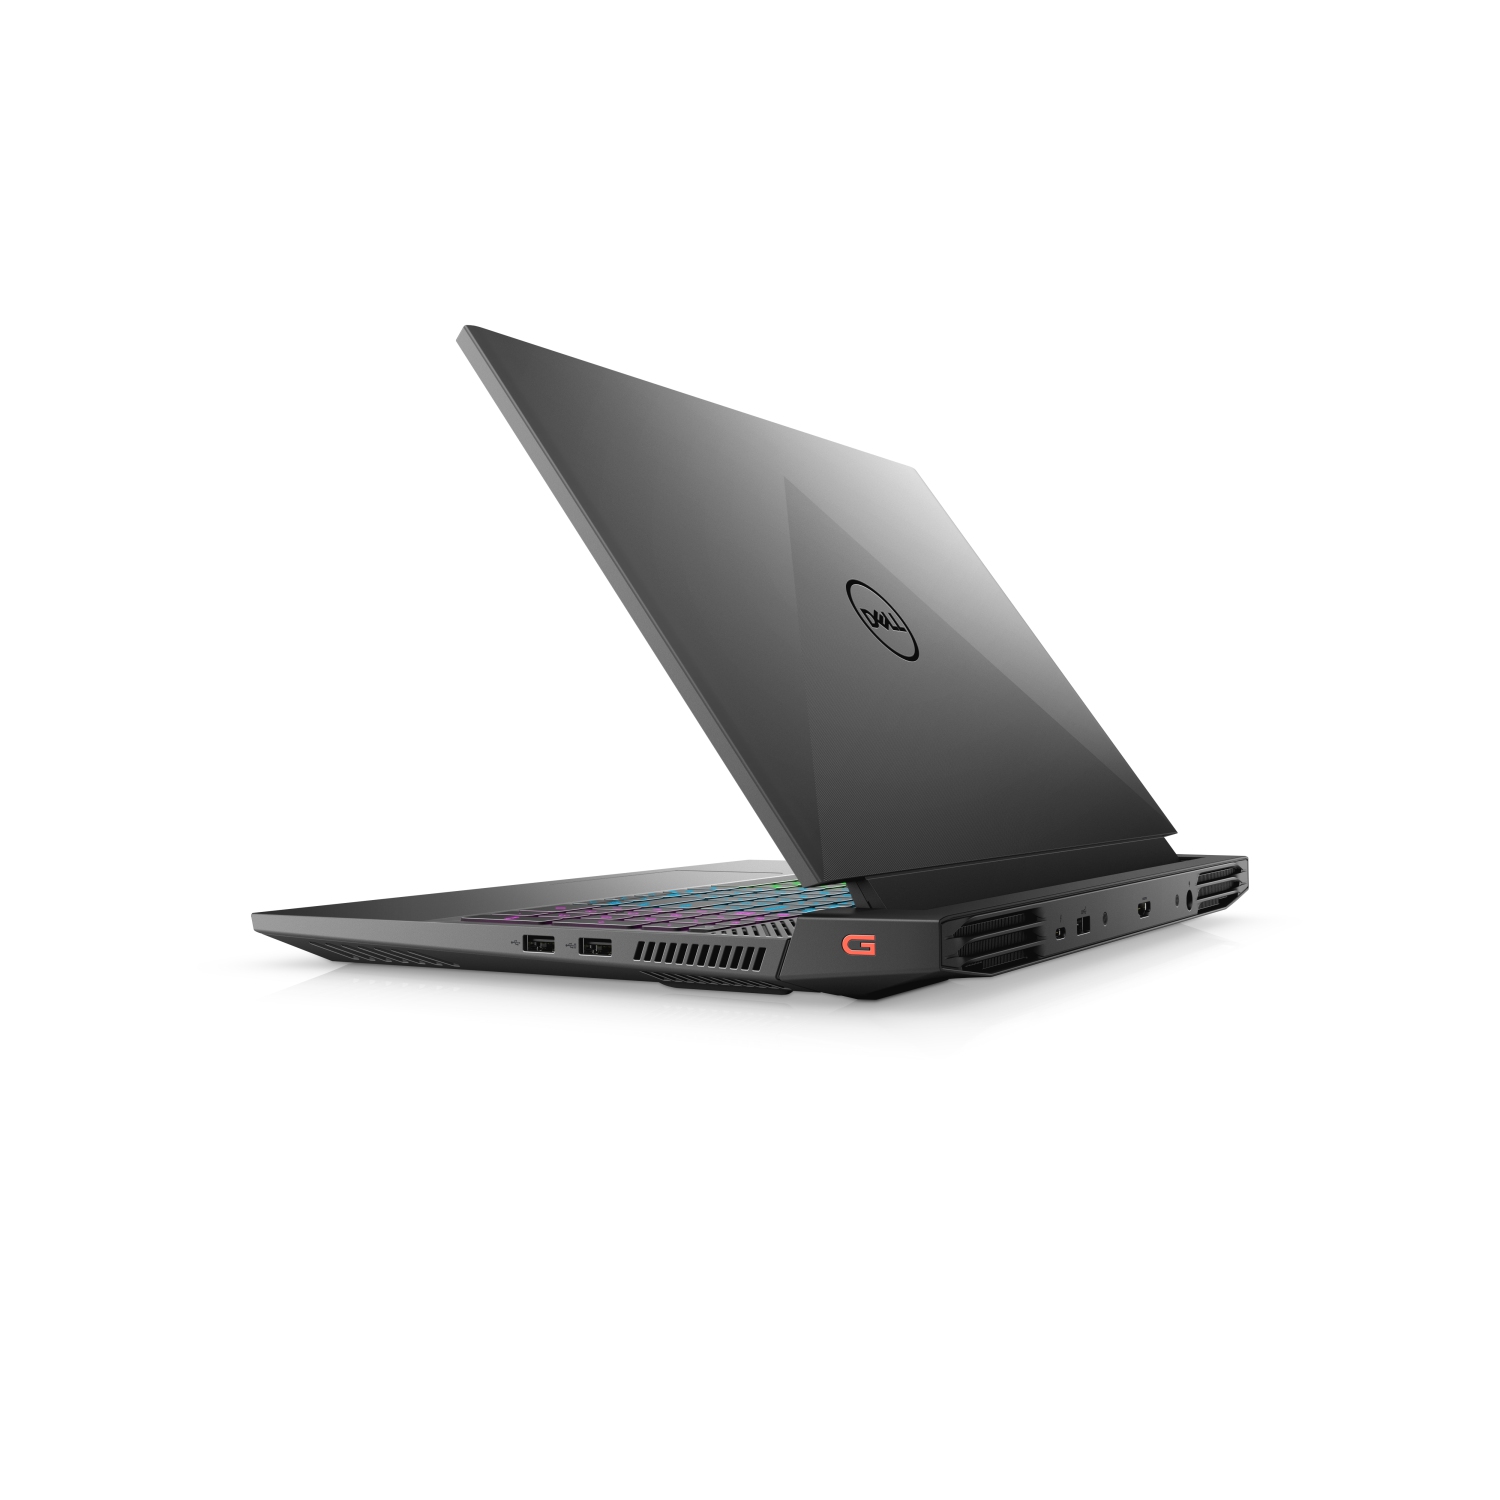 Refurbished (Excellent) – Dell G15 5511 Gaming Laptop (2021) | 15.6" FHD | Core i5 - 512GB SSD - 8GB RAM - 3050 Ti | 6 Cores @ 4.5 GHz - 10th Gen CPU